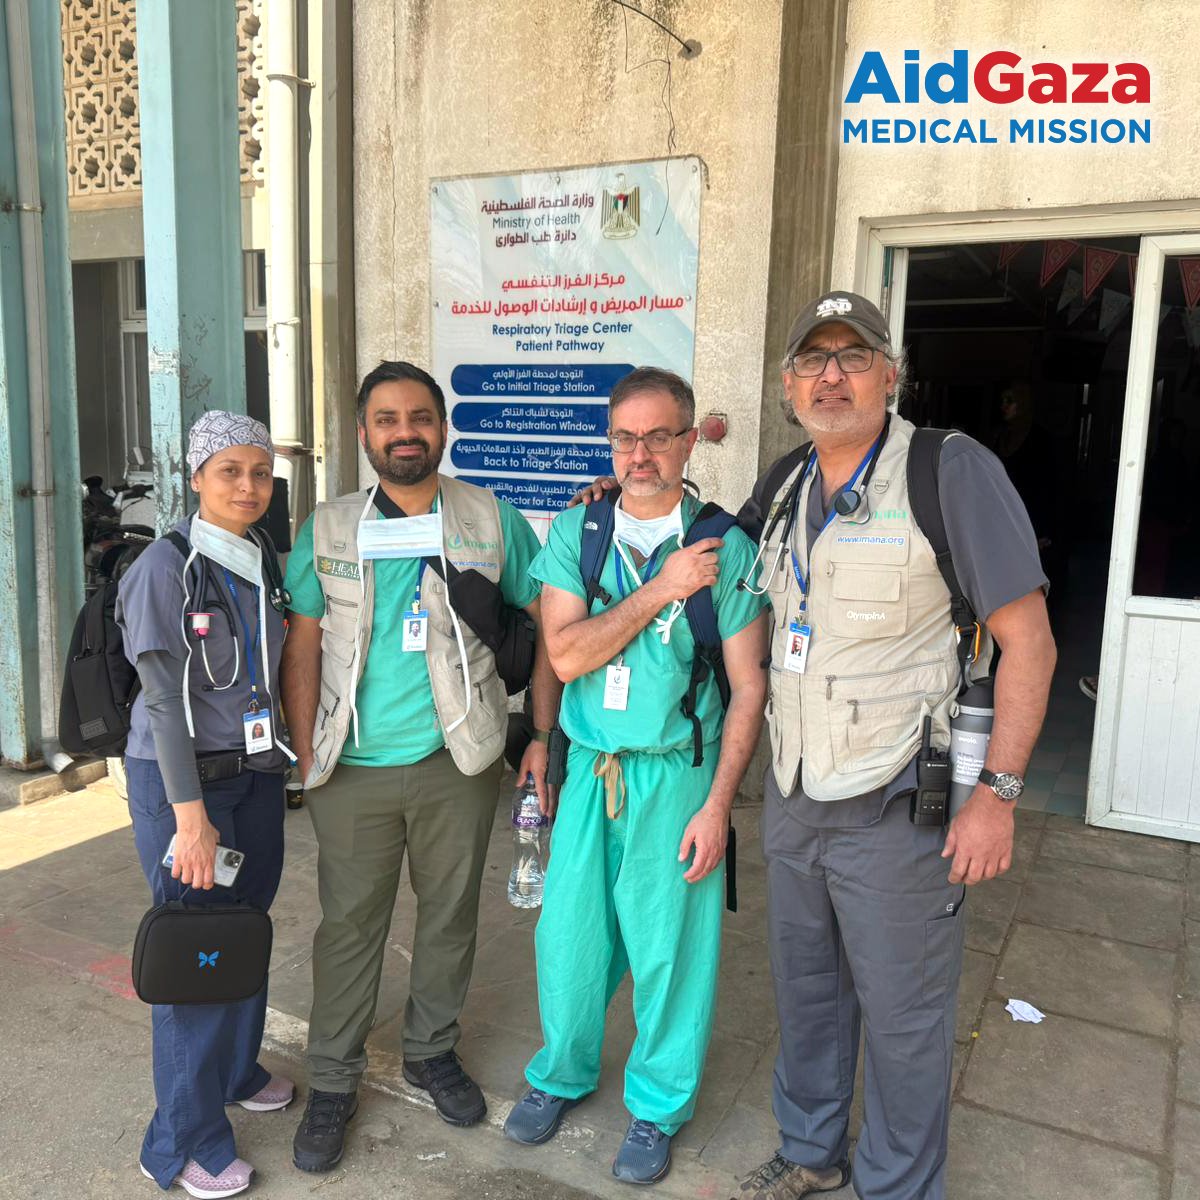 AidGaza Medical Mission Update: Day 1 Our healthcare heroes arrived in Gaza yesterday after a 16 hour road journey from Cairo, carrying a total of 42 duffle bags containing a wealth of medical supplies valued at approximately $140,000. These are essential disposables like...